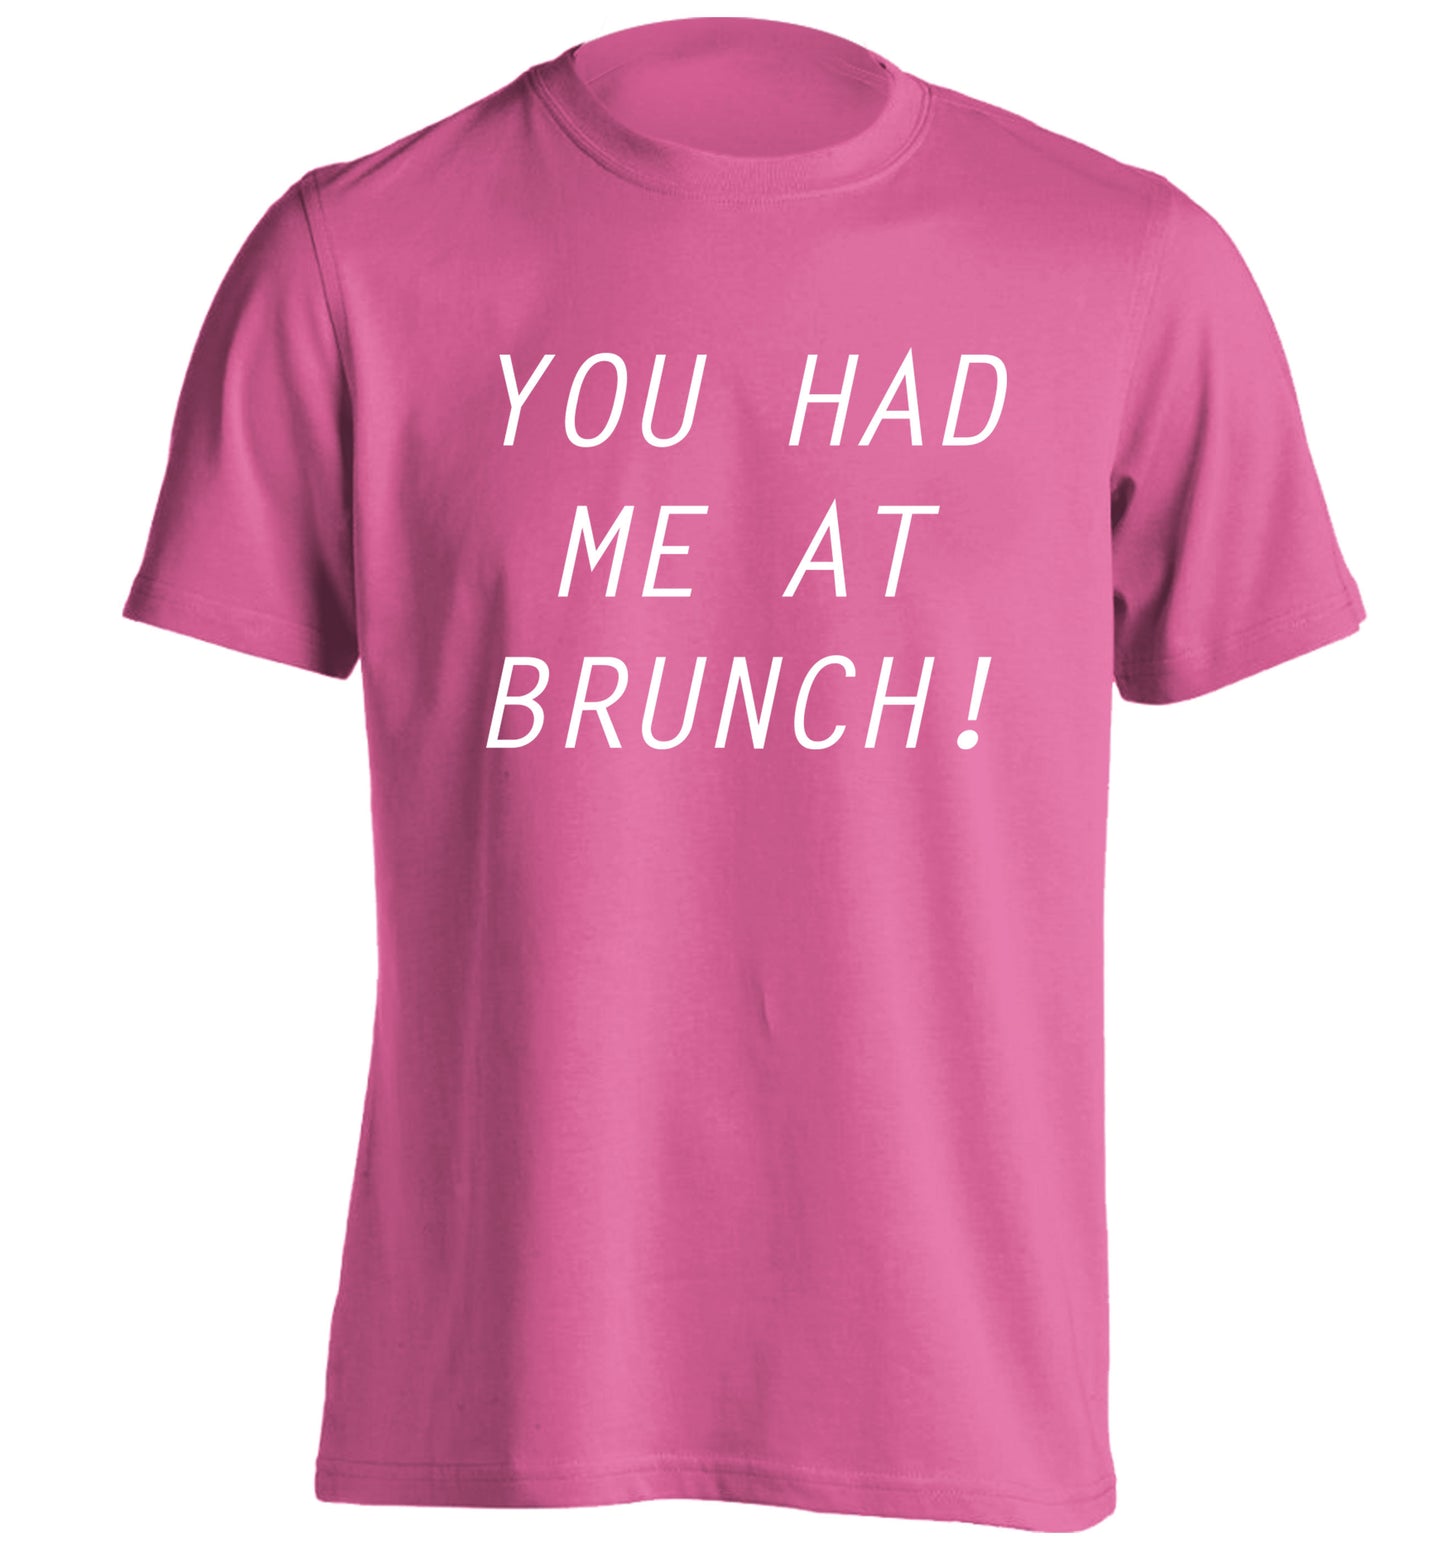 You had me at brunch adults unisex pink Tshirt 2XL